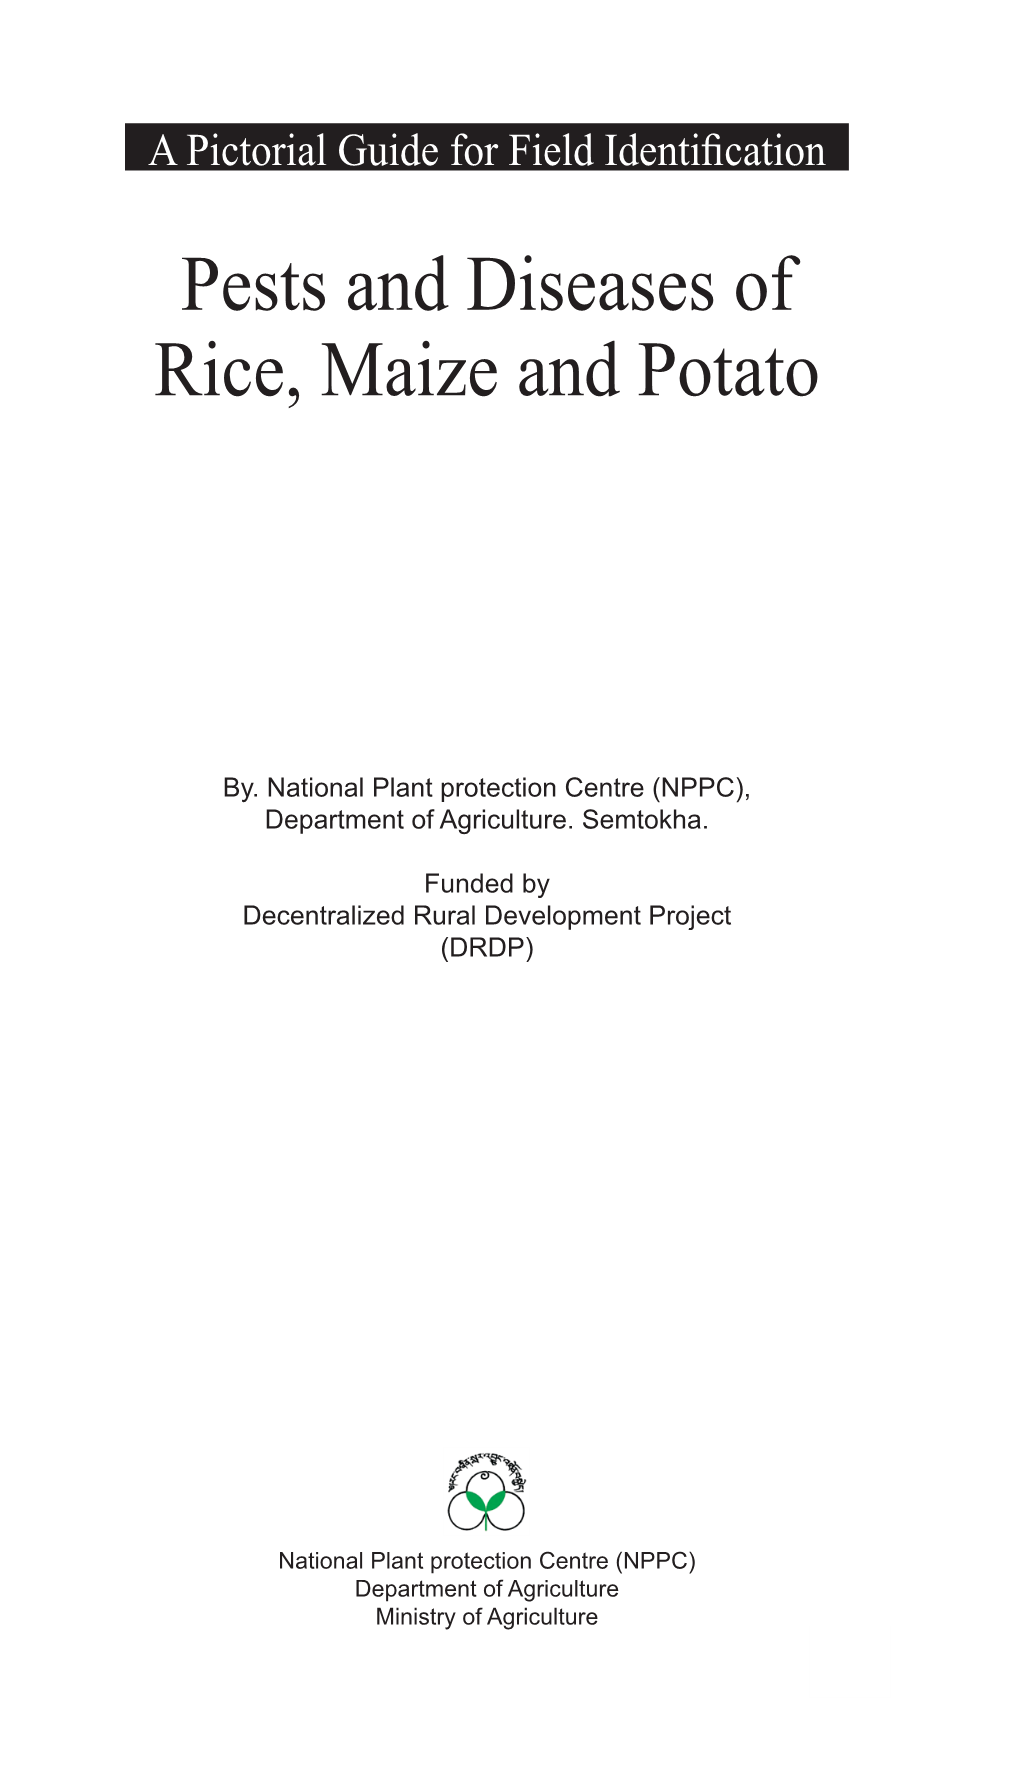 Pests and Diseases of Rice, Maize and Potato